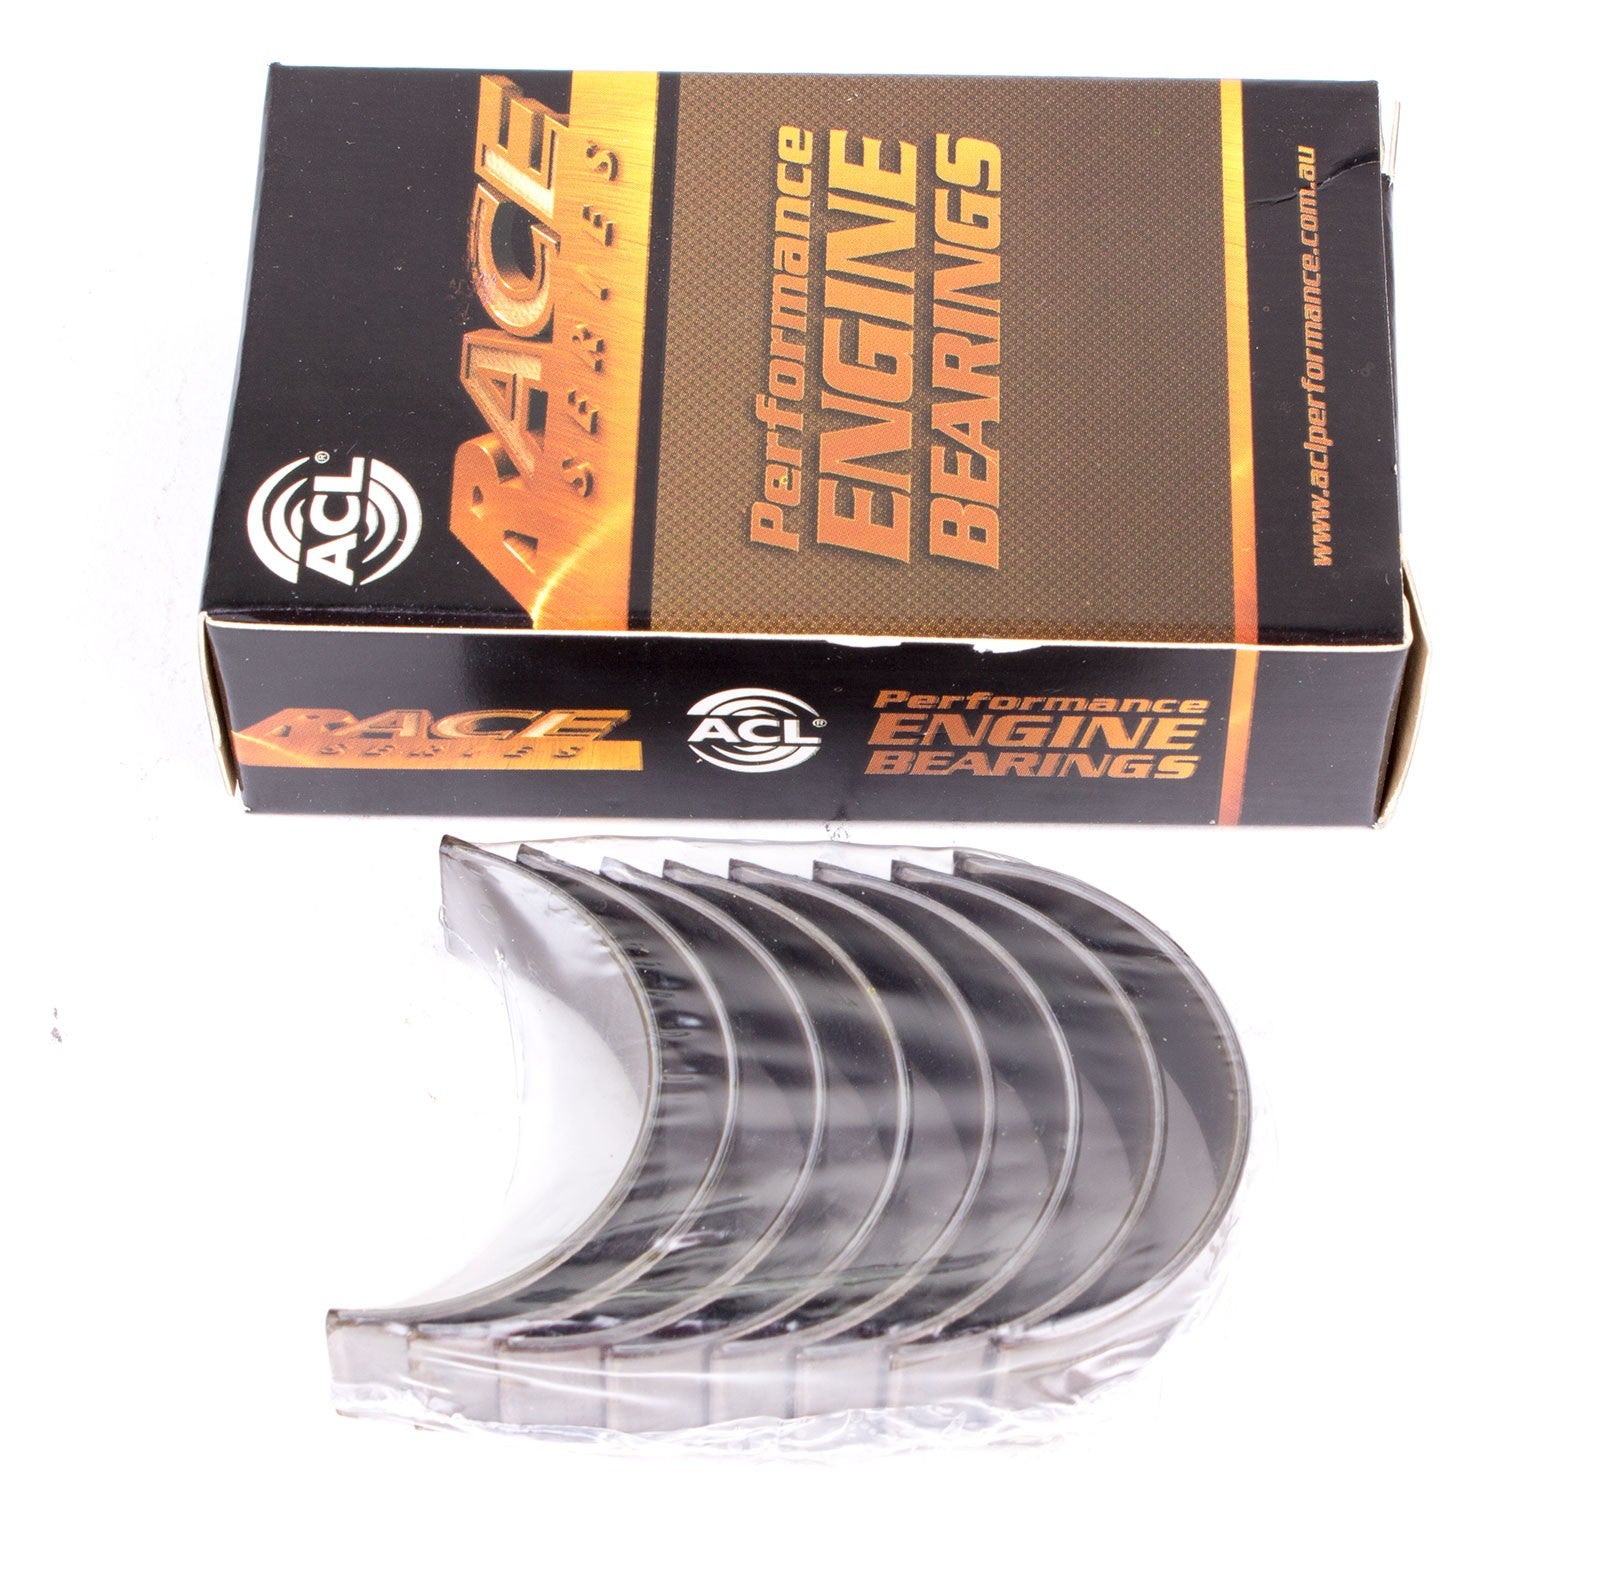 ACL 5M909H-010 Main bearing set (ACL Race Series) Photo-0 